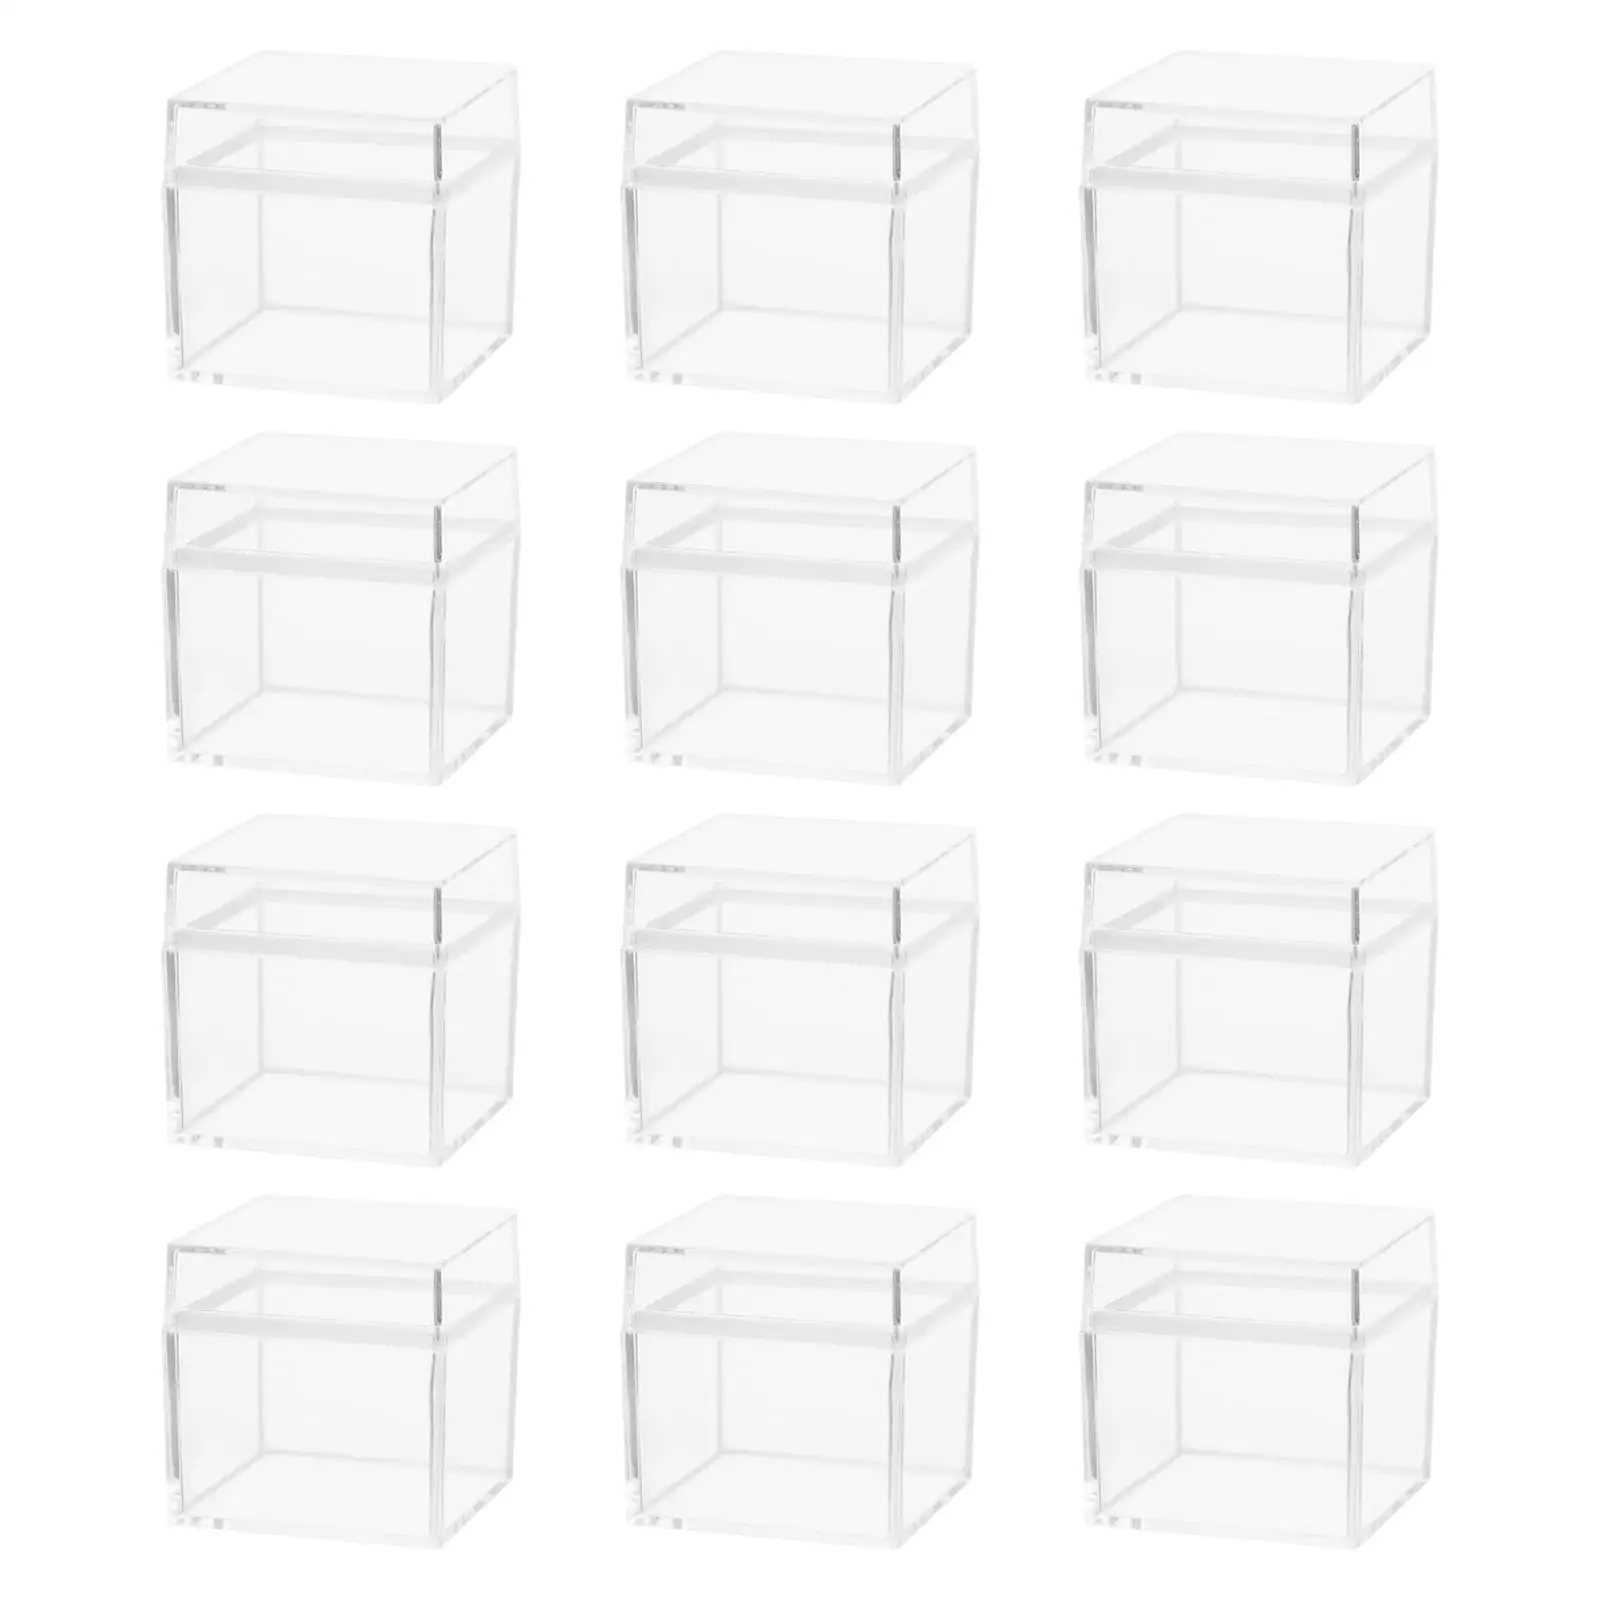 12Pcs Square candy Boxes Jewelry Organizer Display Storage Case Transparent 5cm for art Crafts Statues Holiday Party